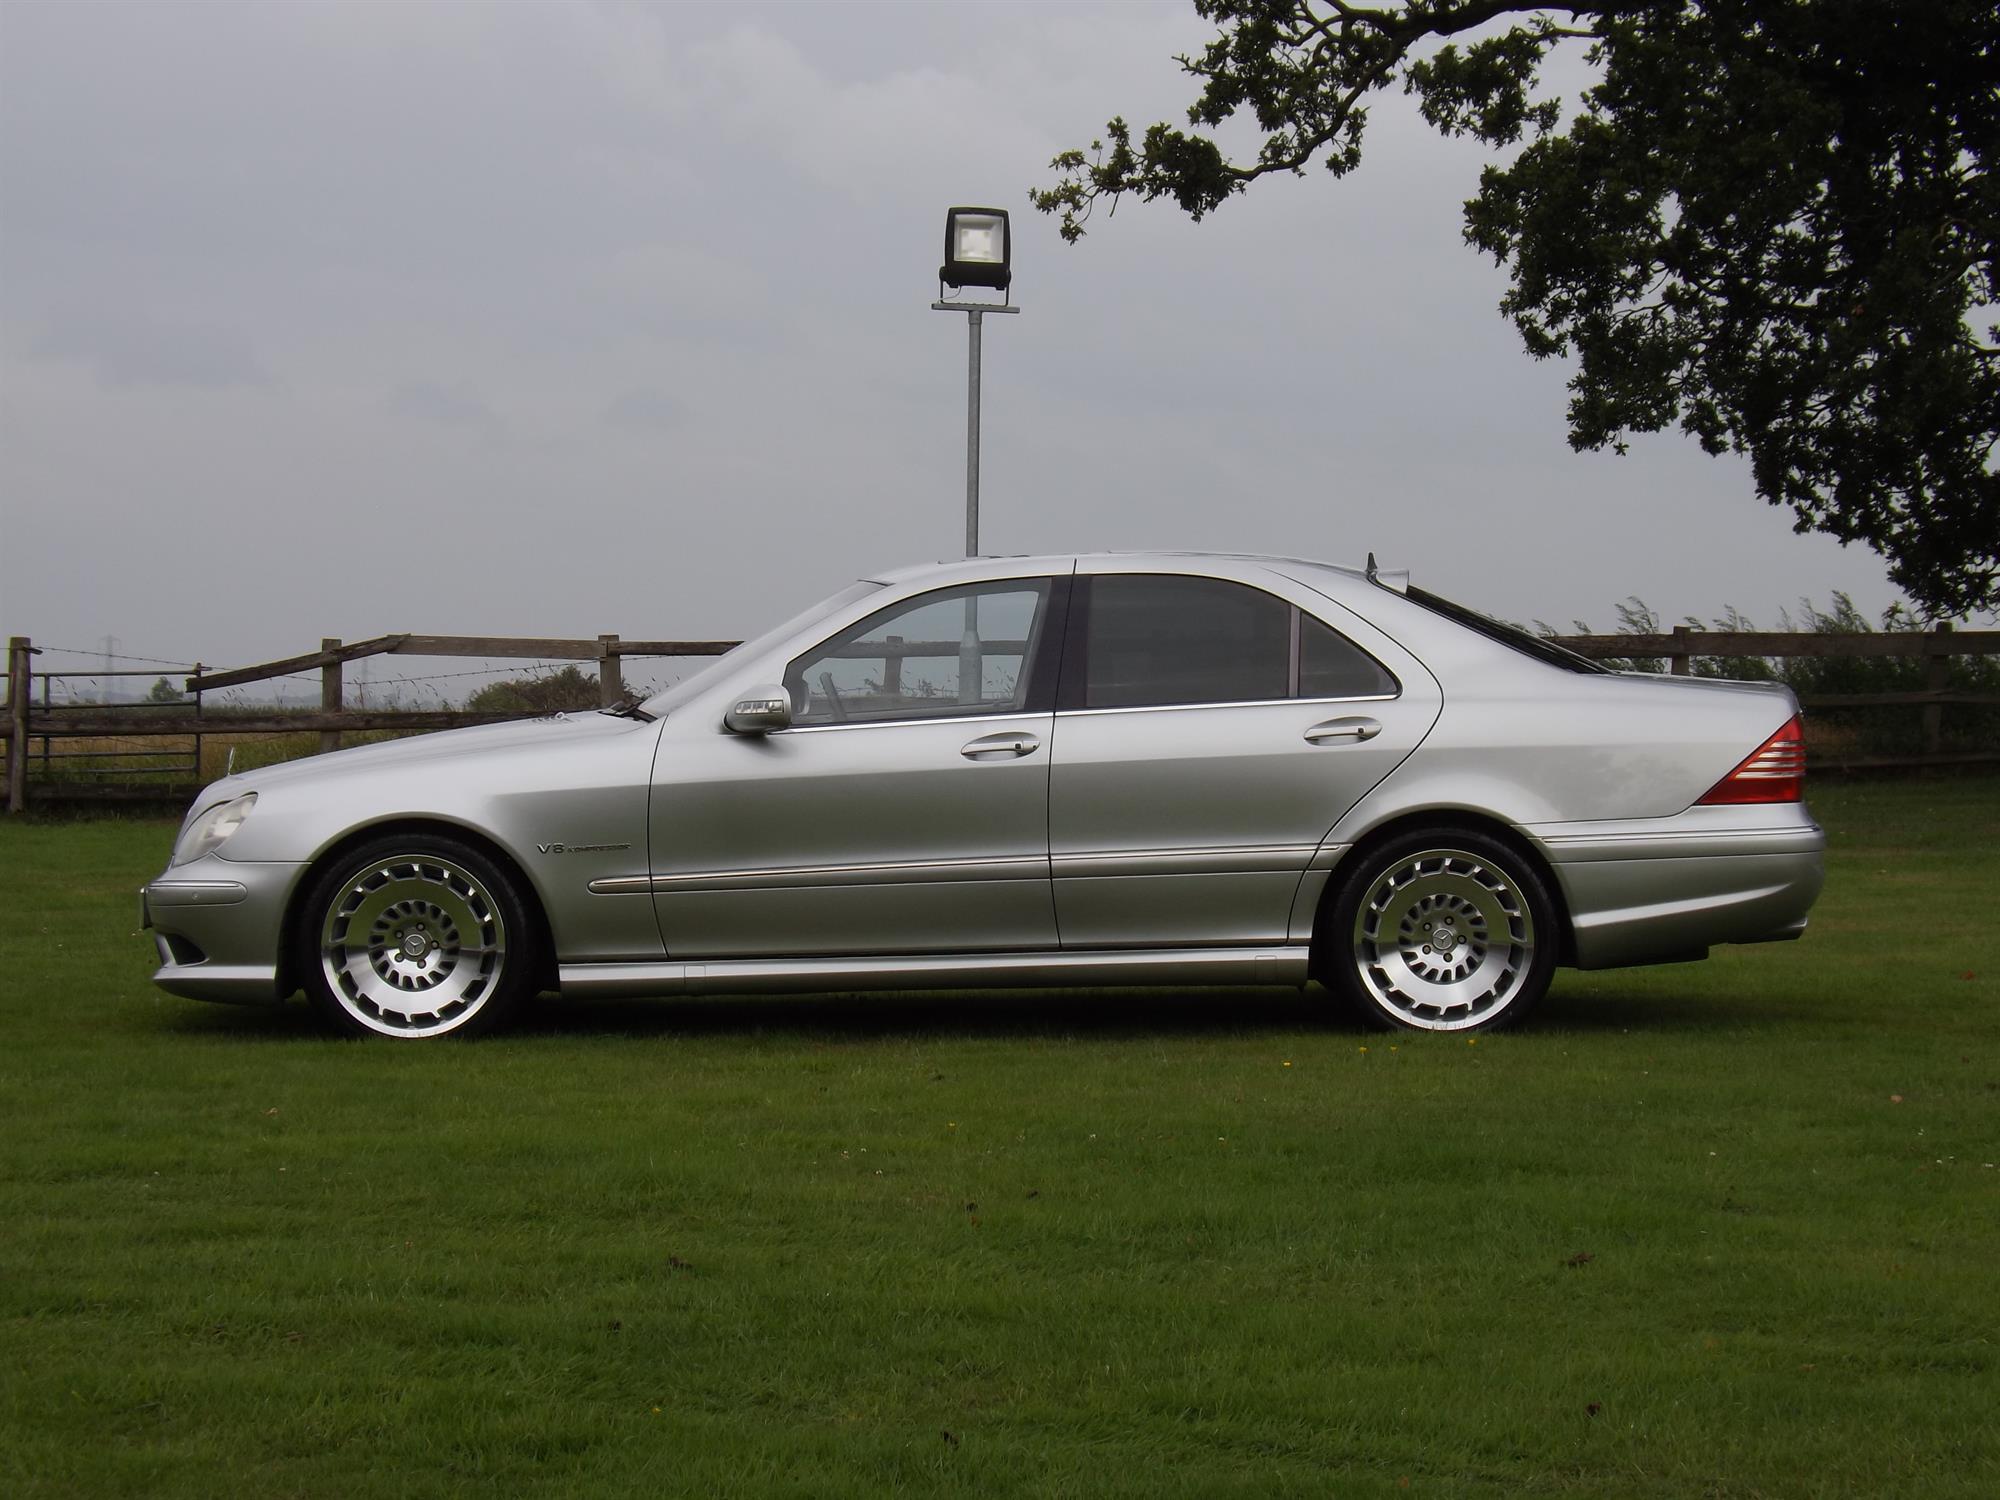 2003 Mercedes-Benz S55 AMG (W220) - Image 2 of 4